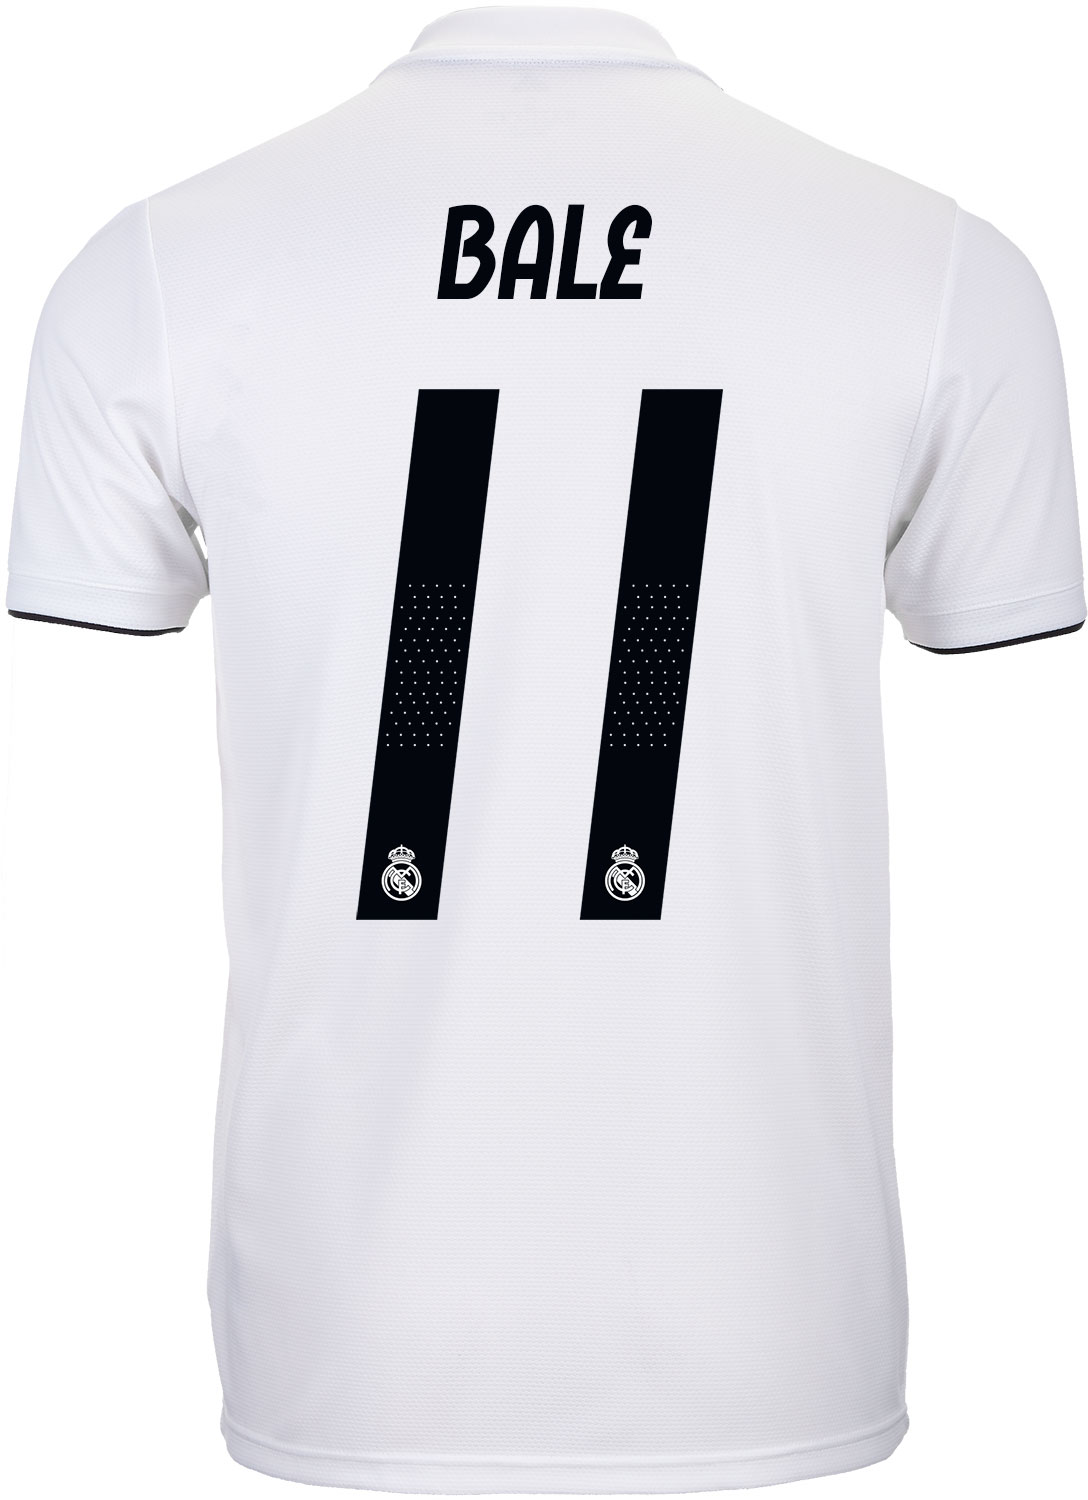 adidas Gareth Bale Real Madrid Home Jersey - Youth 2018-19